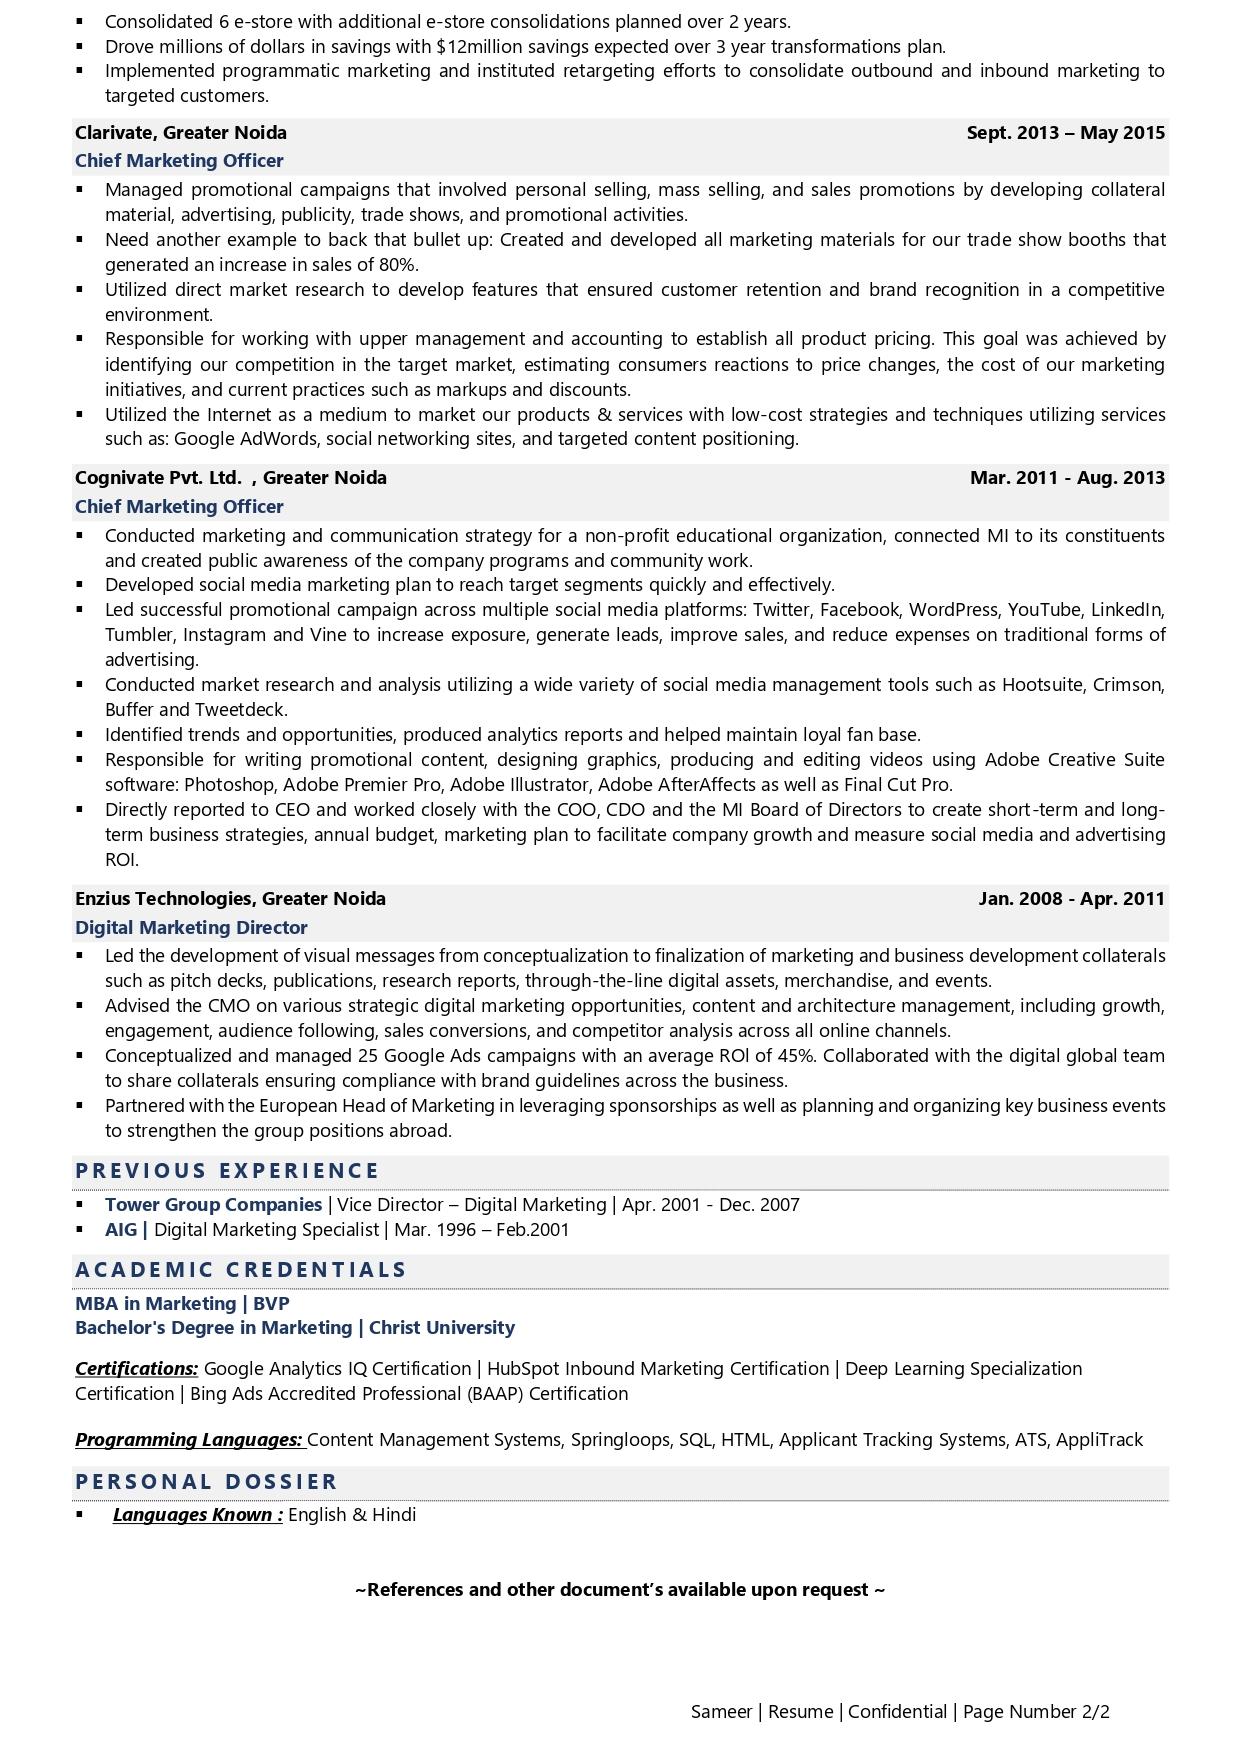 Chief Marketing Officer - Resume Example & Template